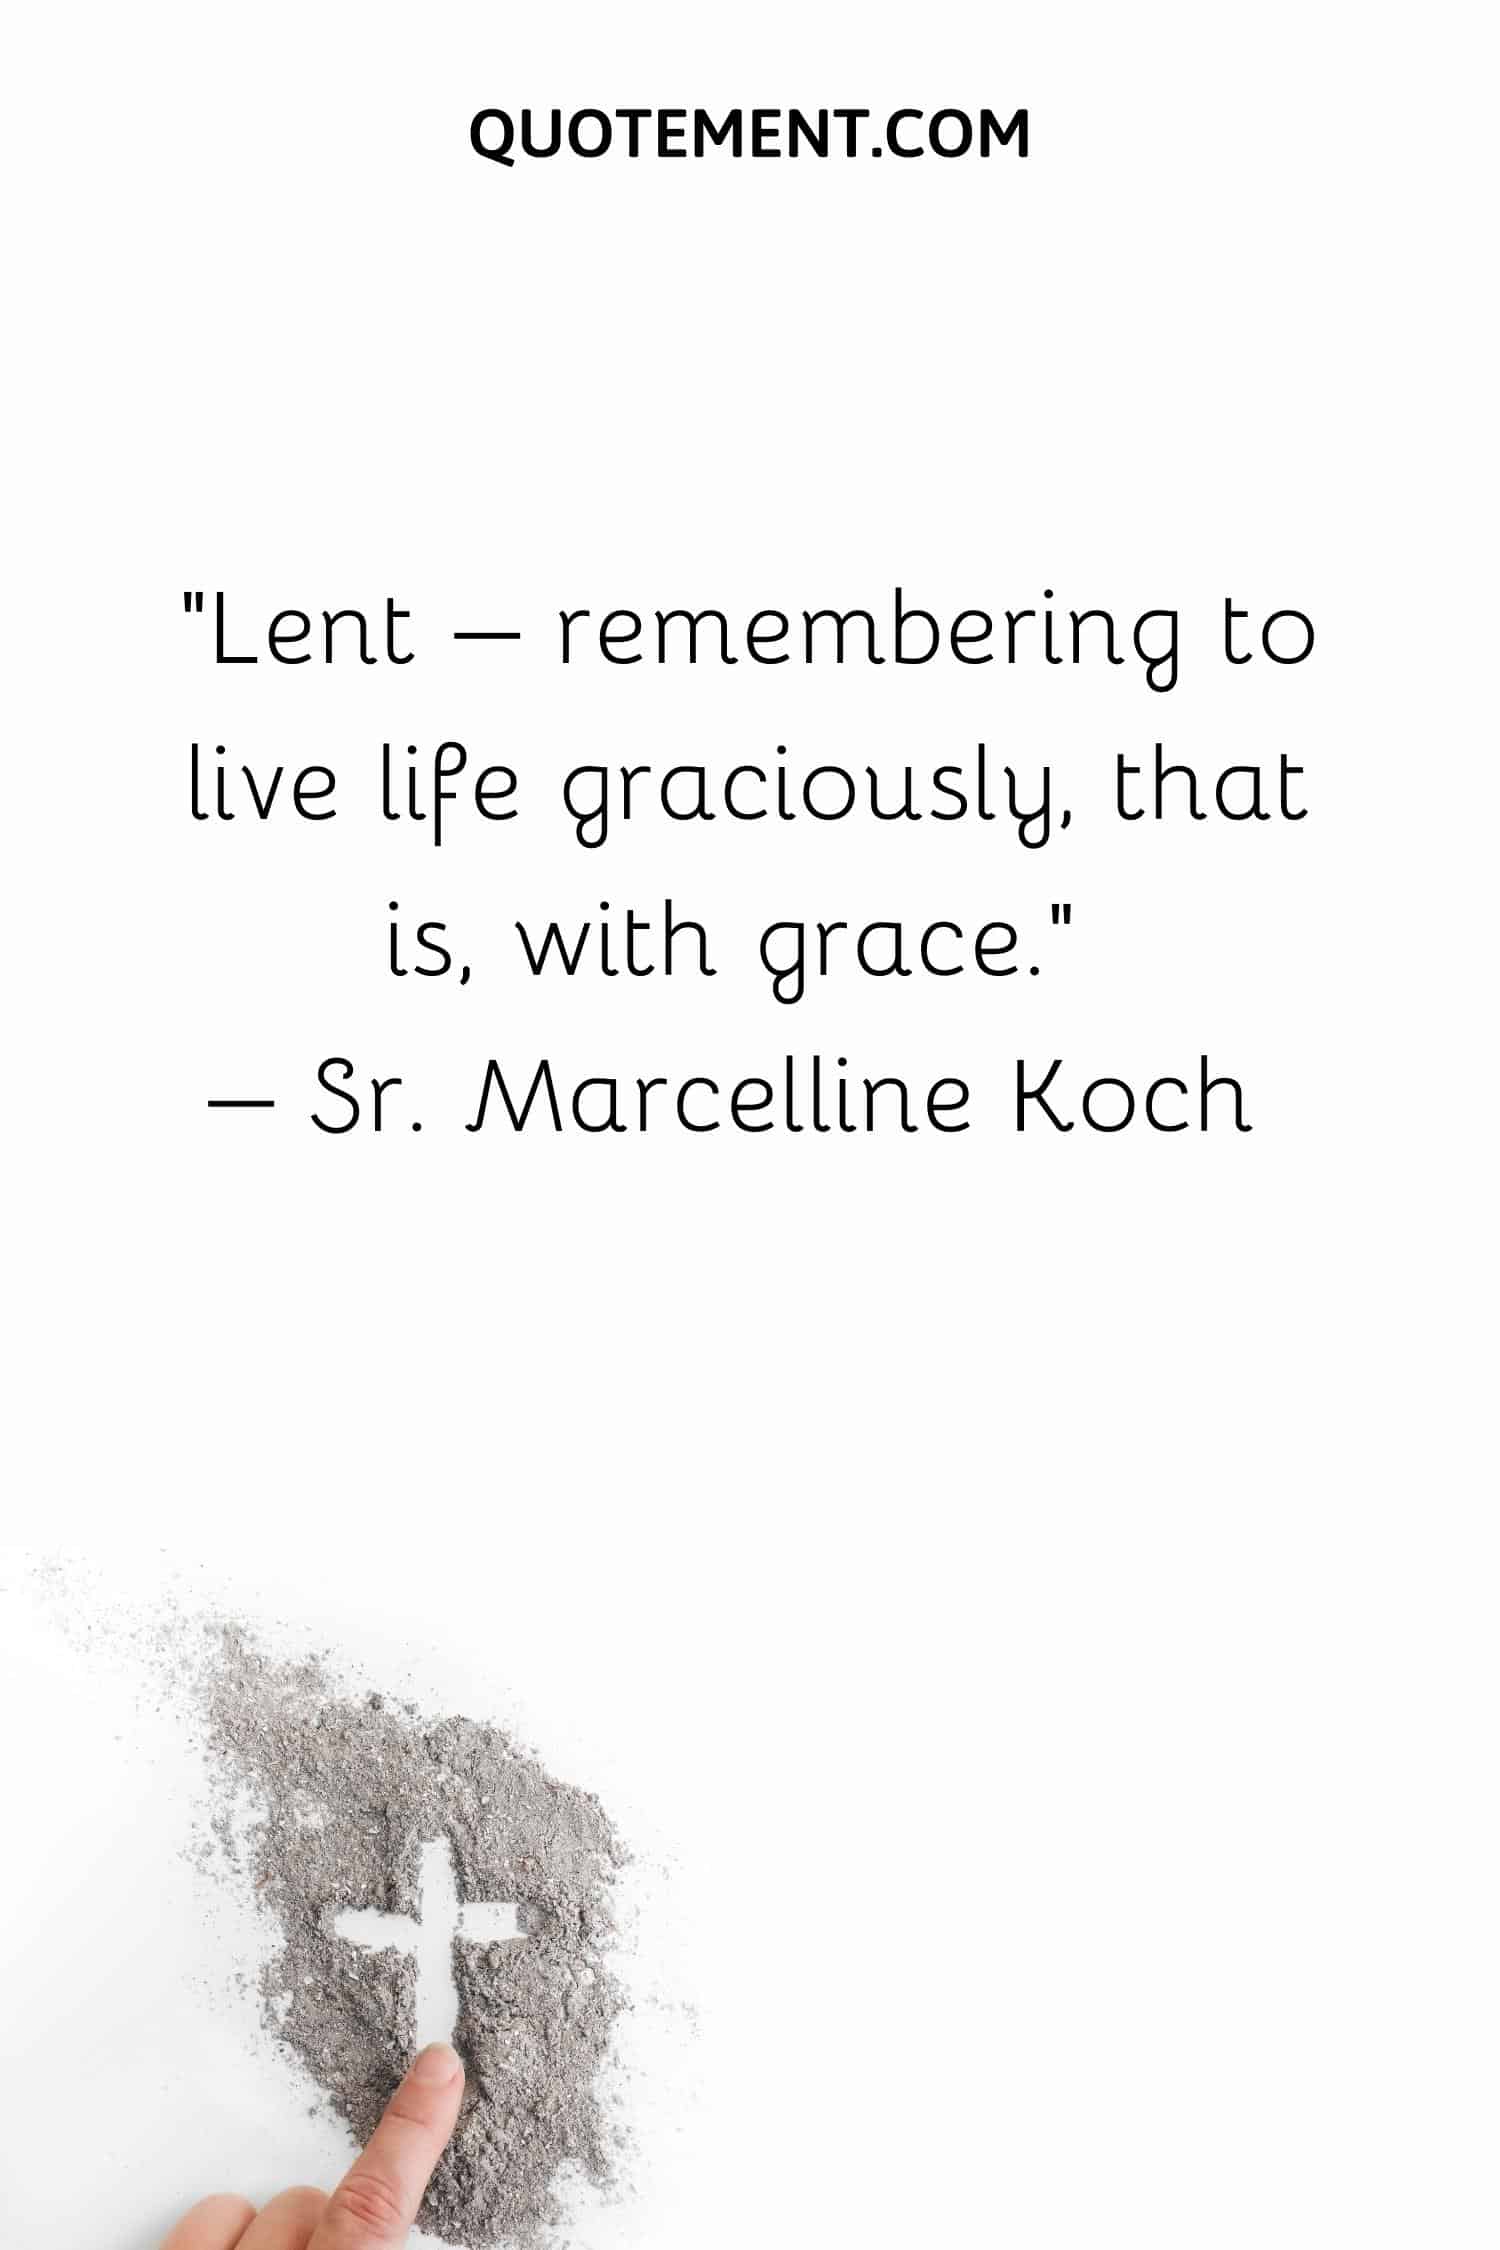 Lent – remembering to live life graciously, that is, with grace